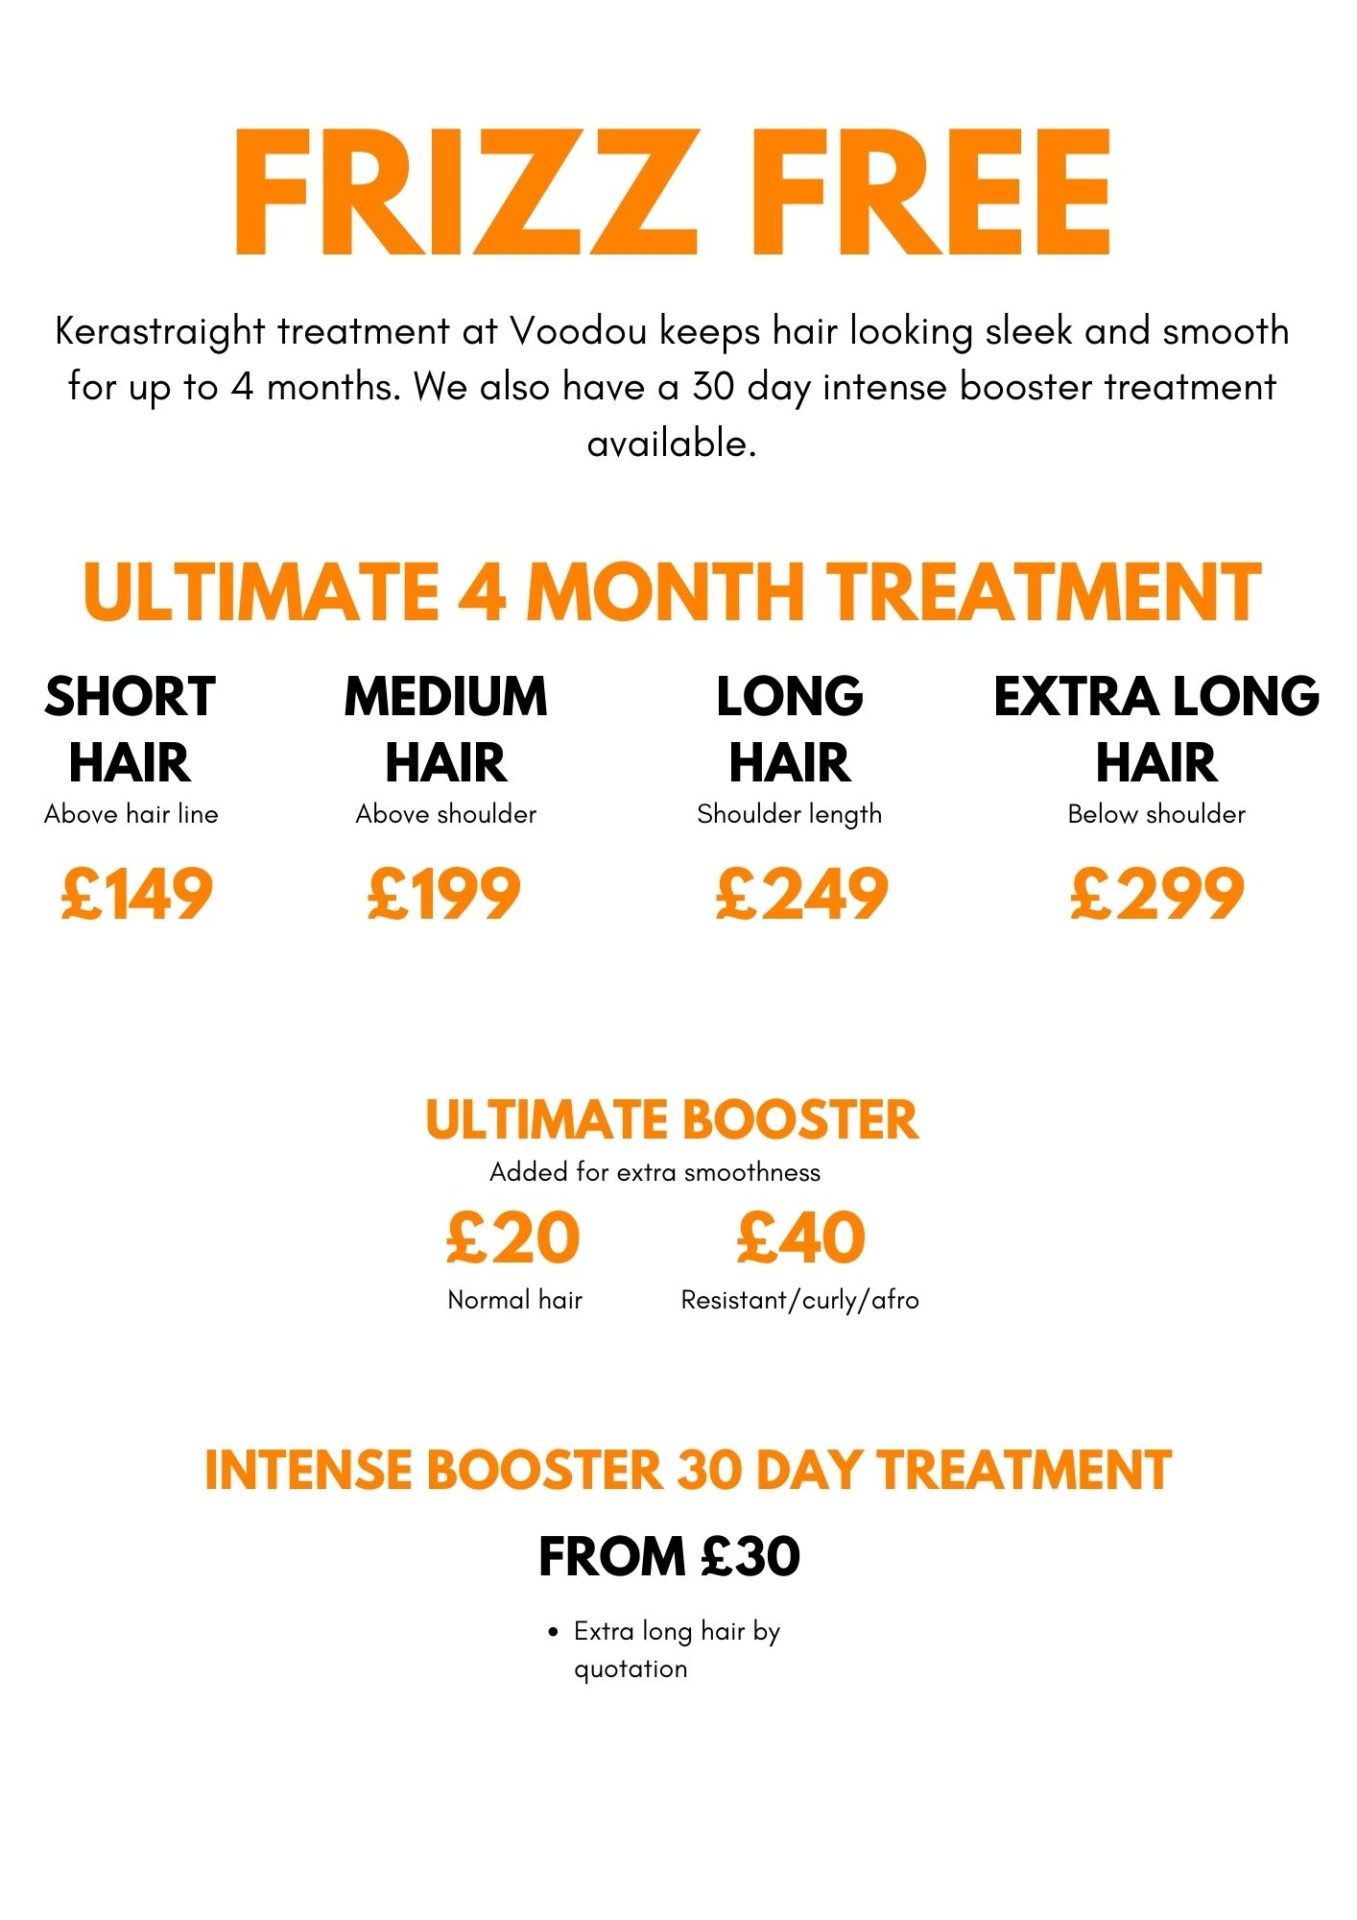 Brazilian Blow Dry Treatments in Liverpool Hair Salons